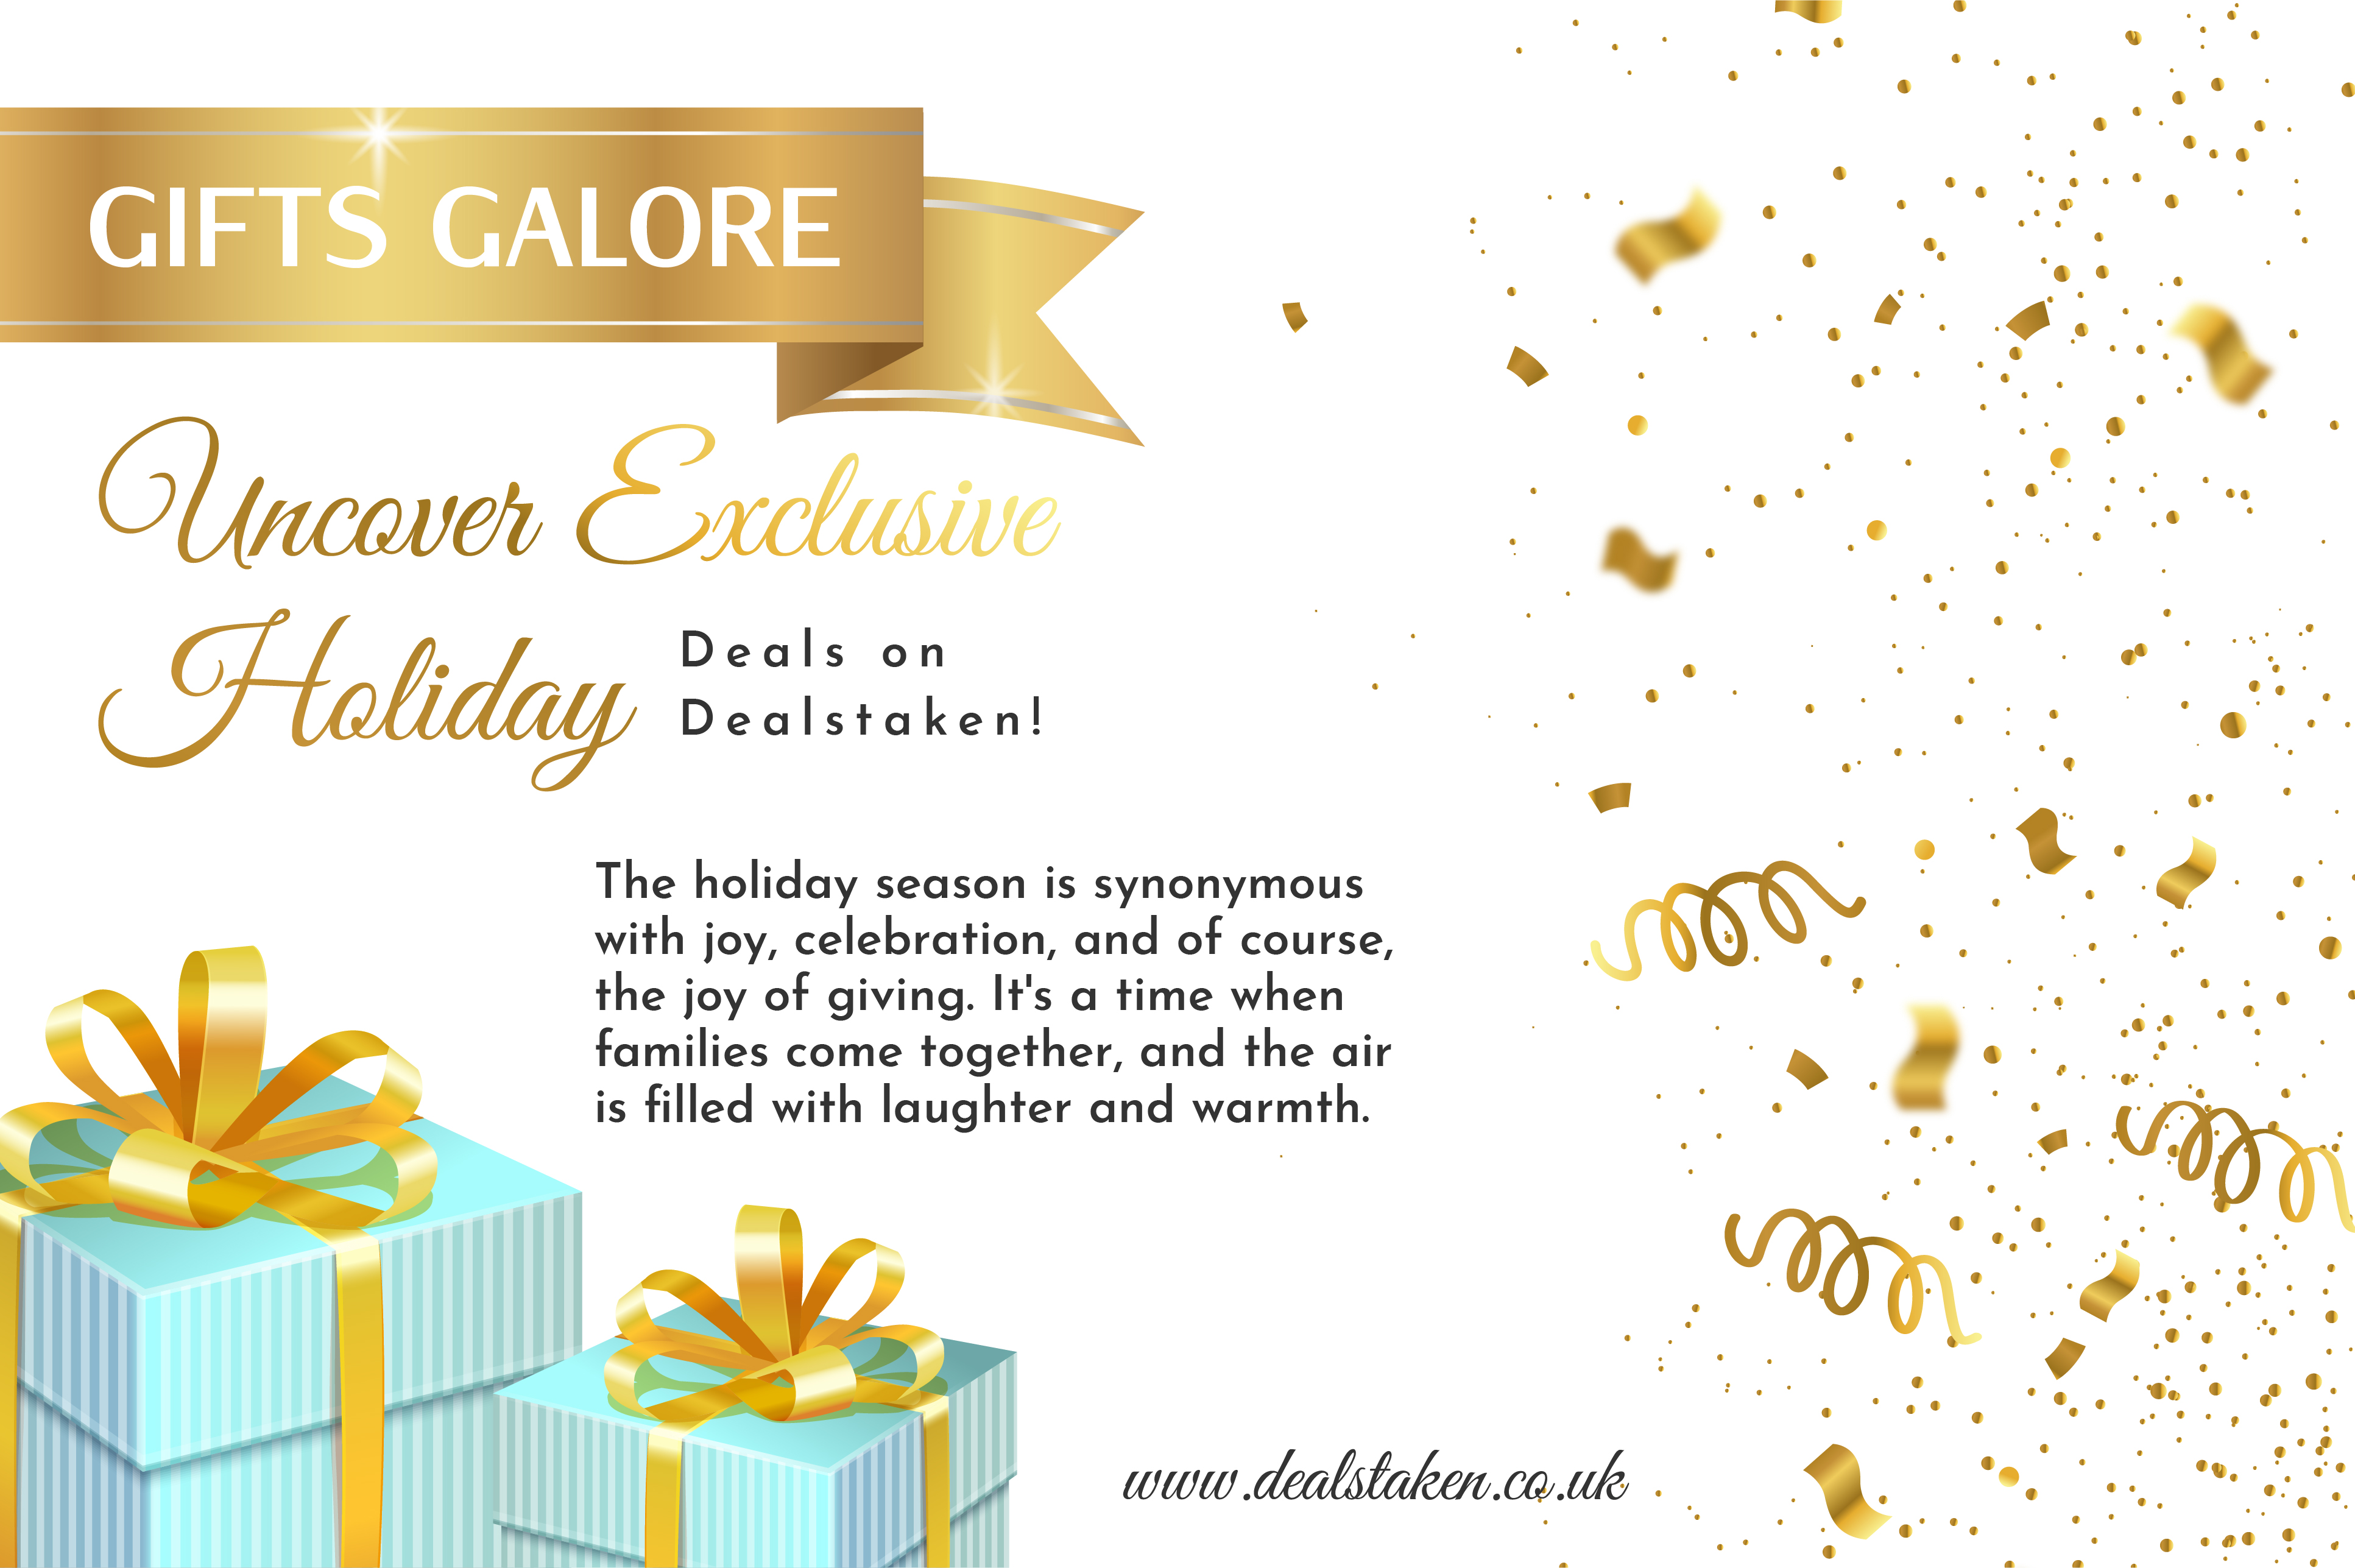 gifts-galore-uncover-exclusive-holiday-deals-on-dealstaken